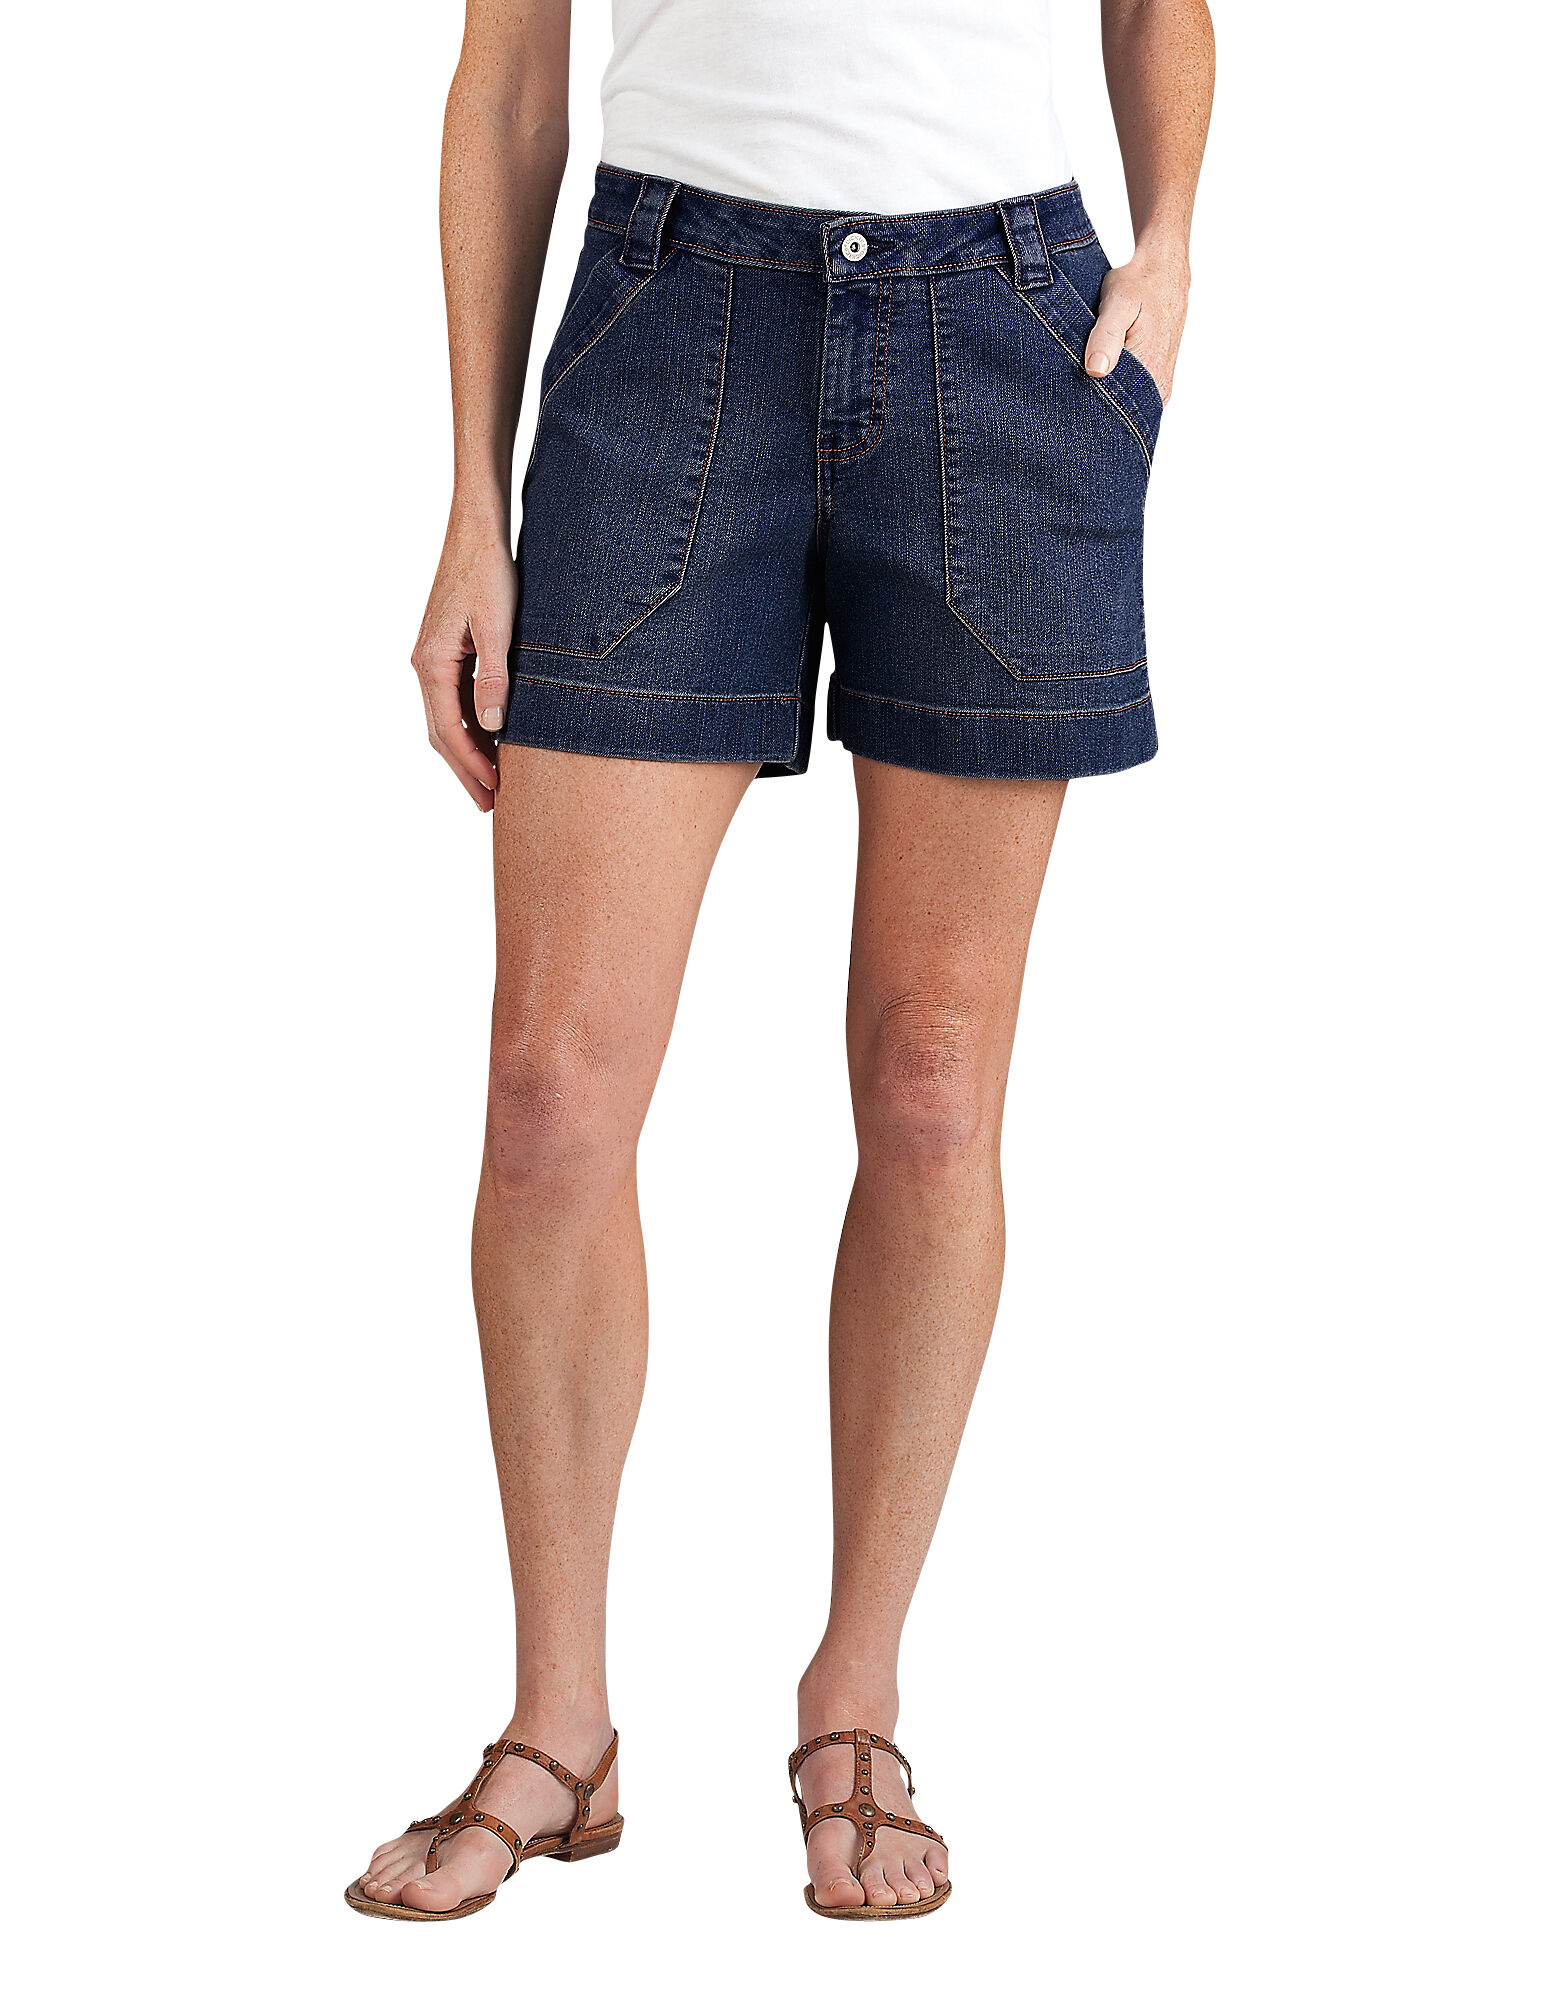 Denim Shorts for Women | Relaxed Fit | Dickies